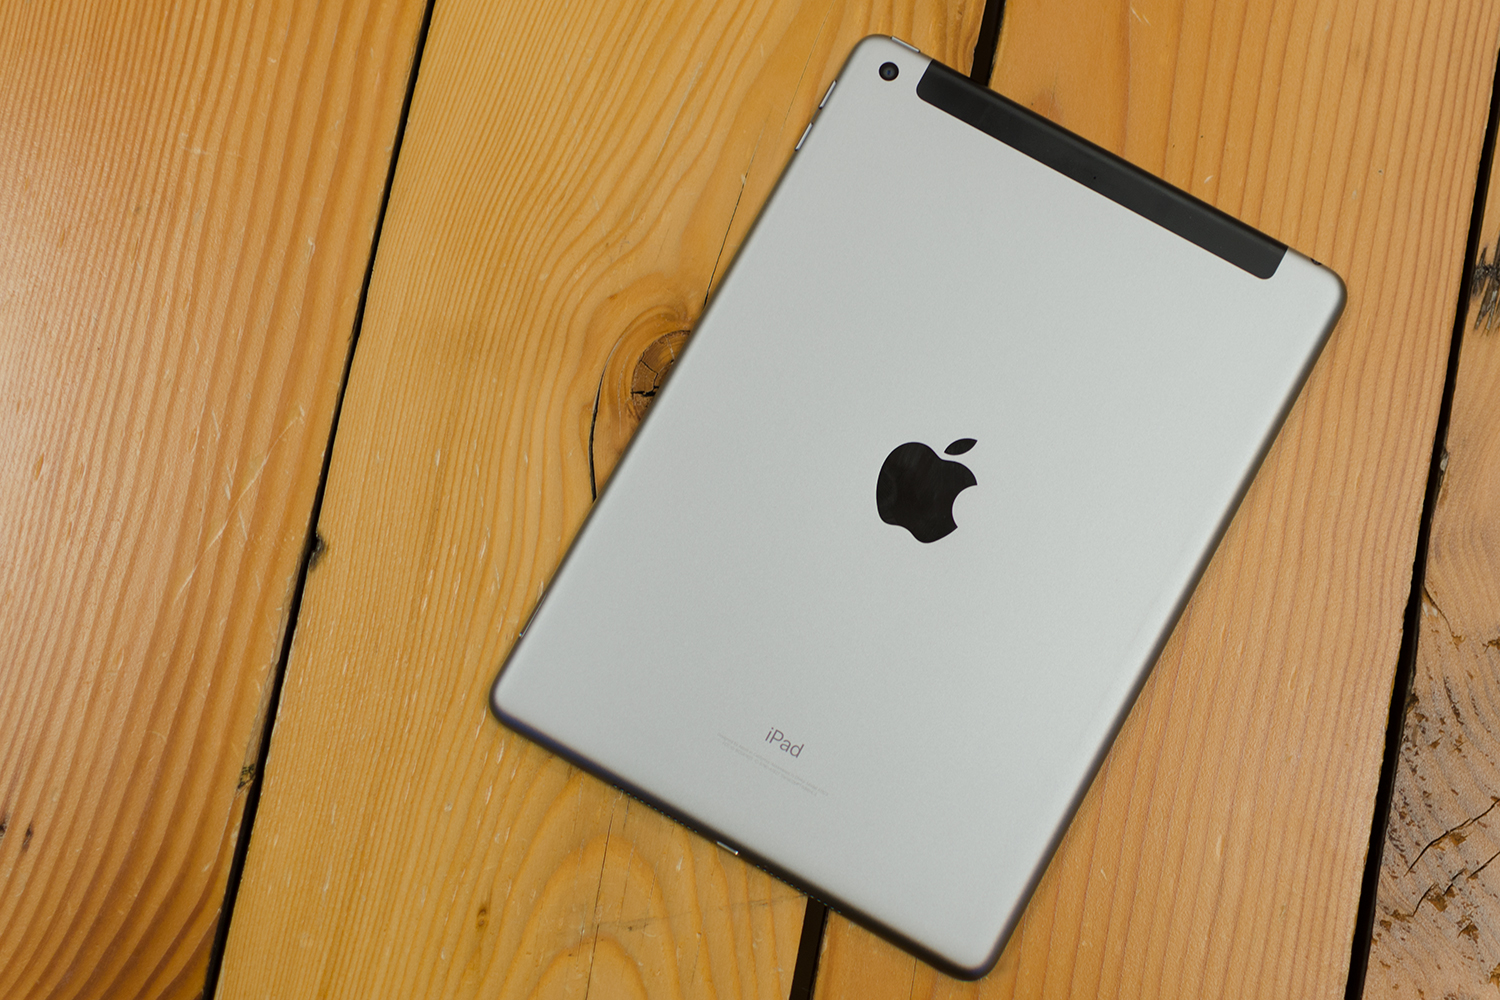 Apple iPad Review (2017): The Best All-Around Tablet | Digital Trends